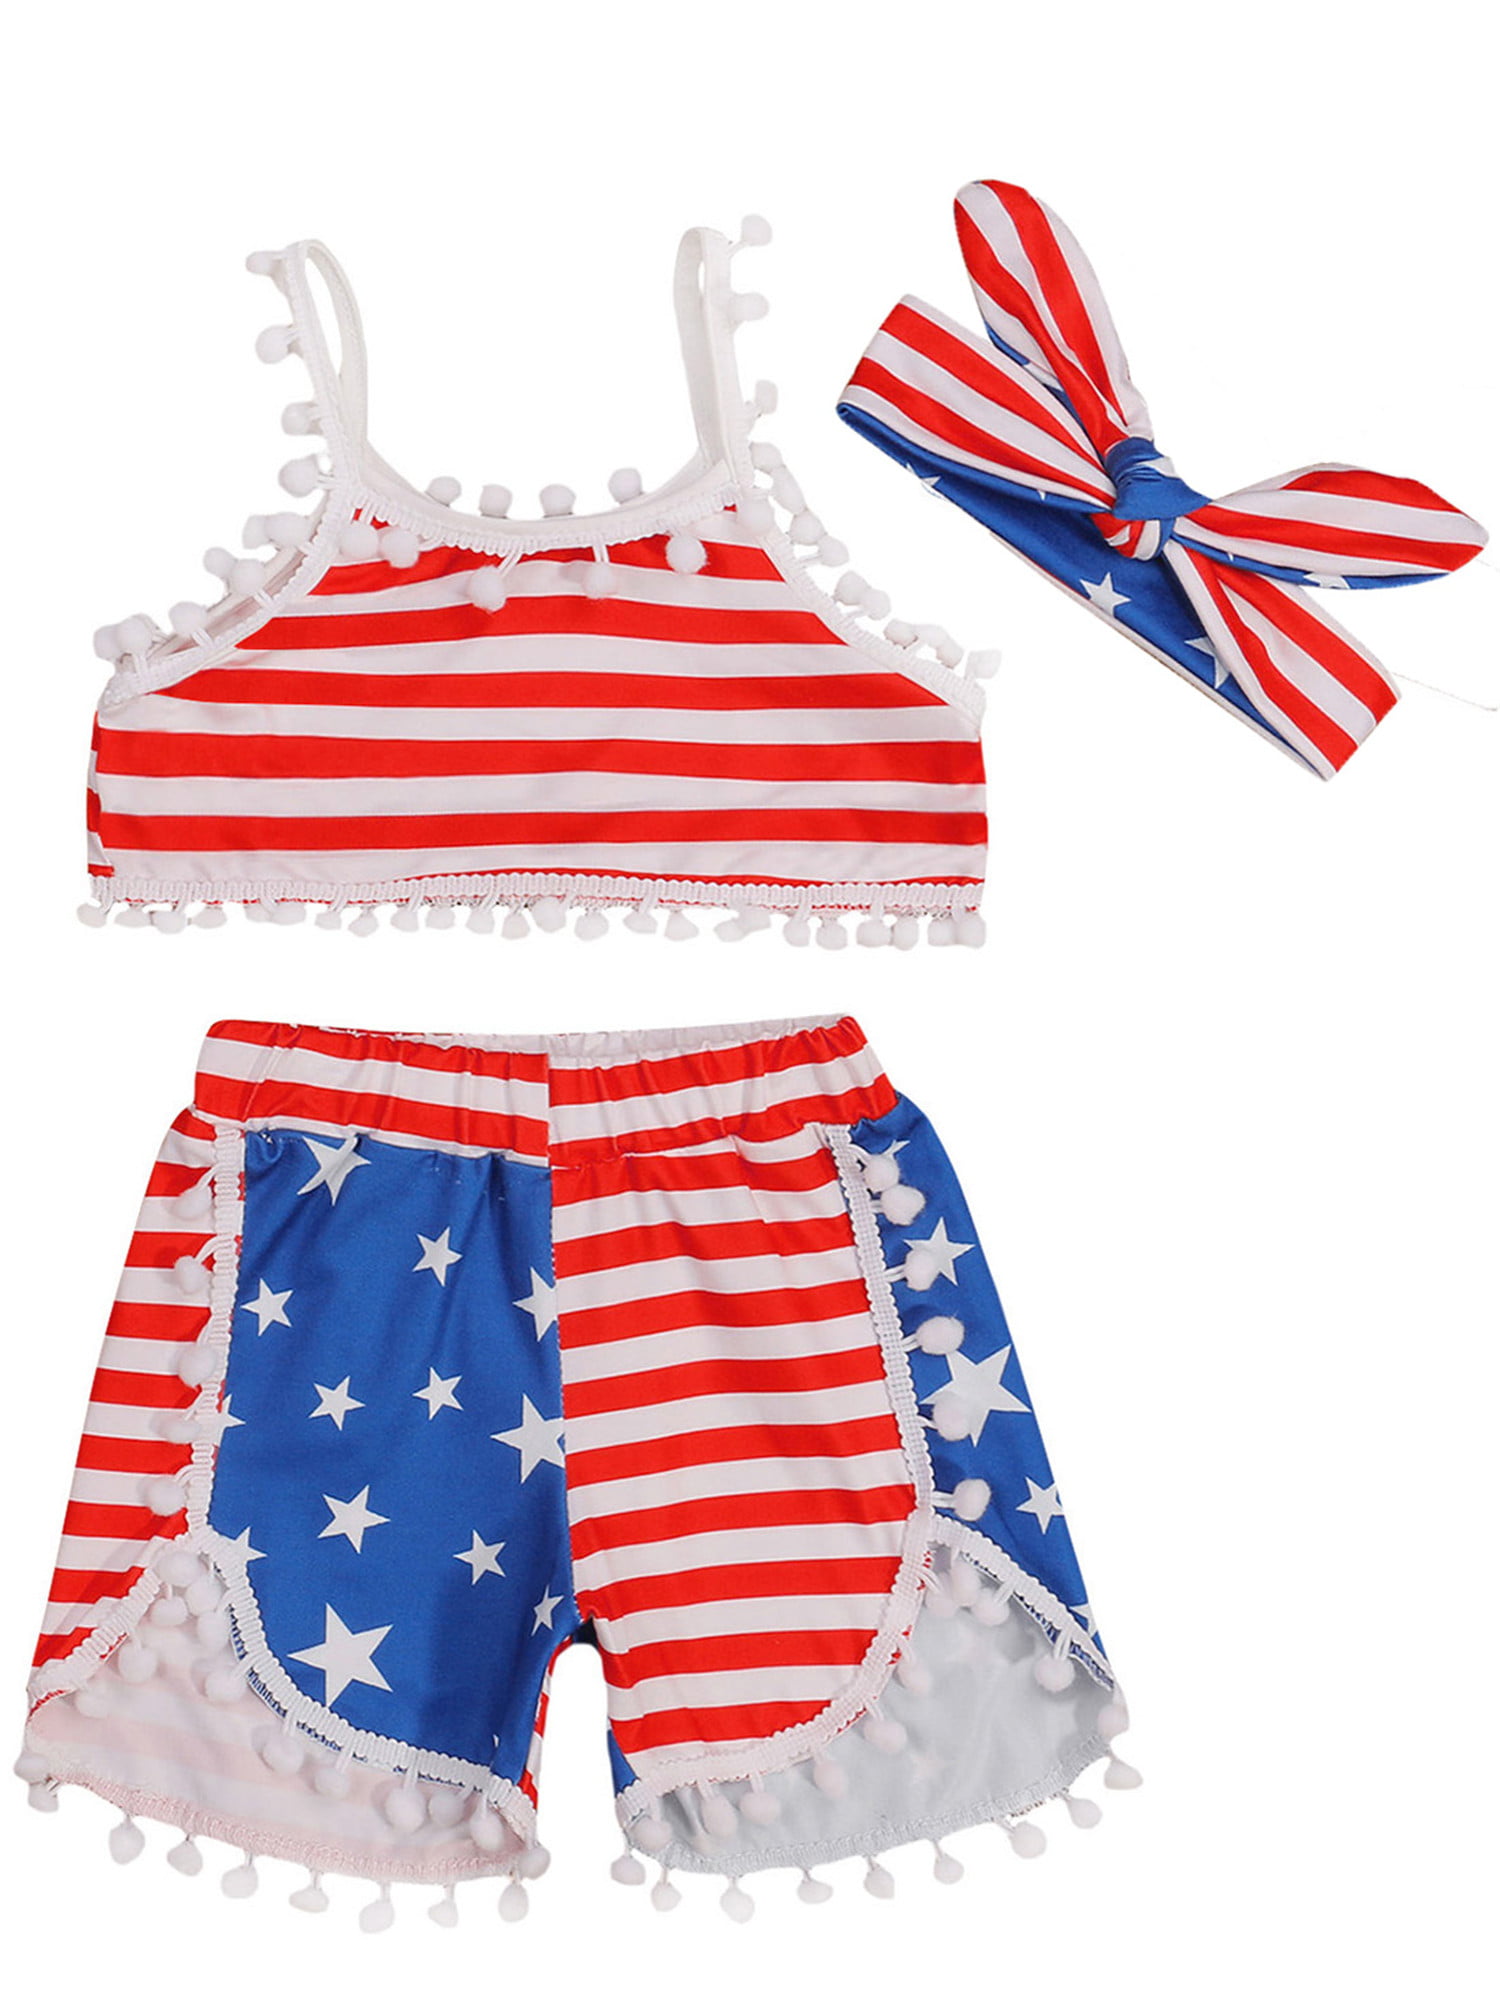 ADDRUALI0 Independence Day 3Pcs Outfits Newborn Kids Baby Girl Star Off Shoulder Crop Top Headband Bowknot Striped Shorts 